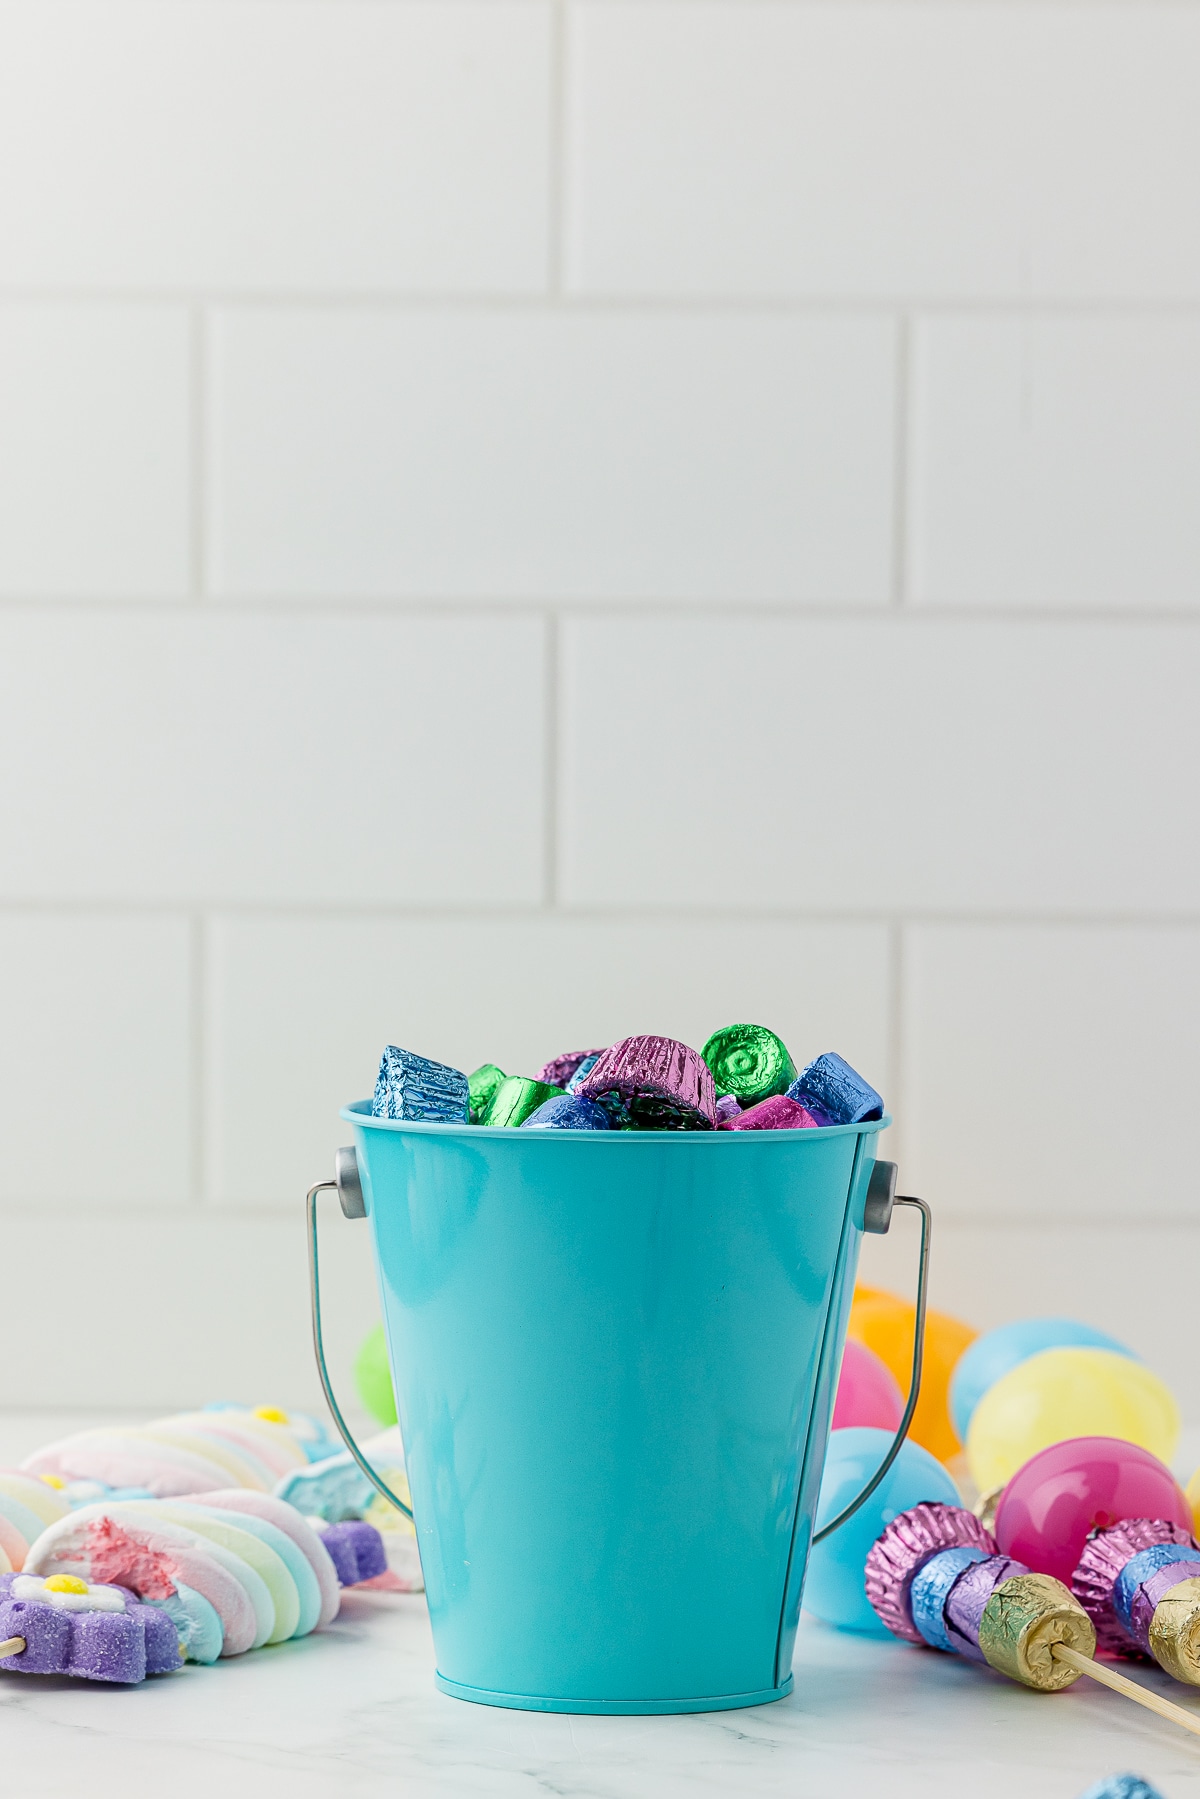 blue pail filled with reeses's mini peanut butter cups and easter rolos